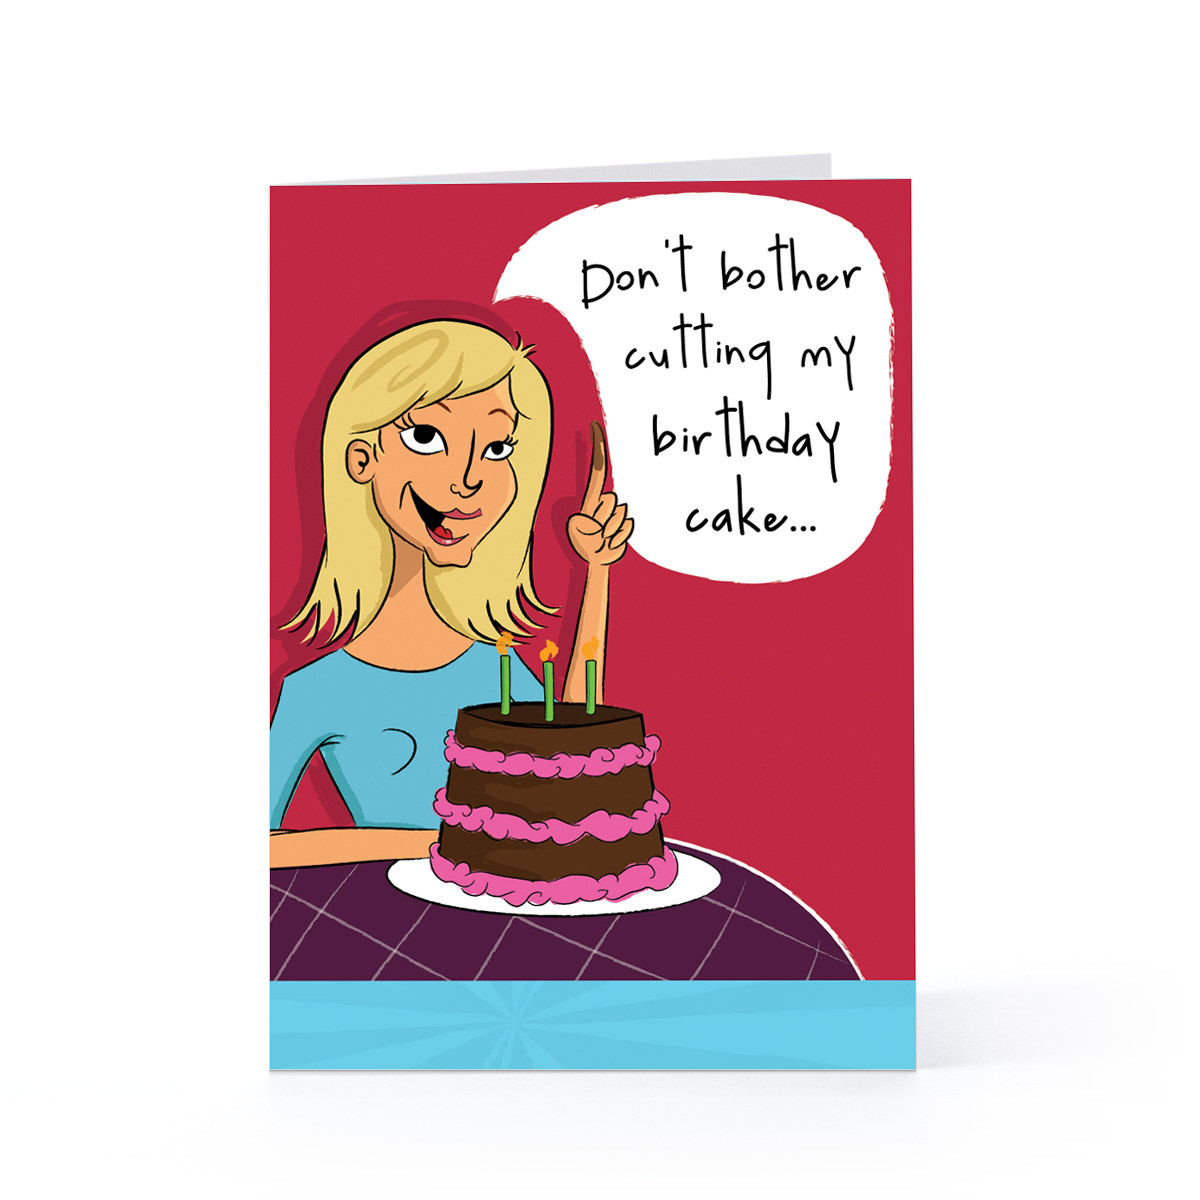 Quotes For Birthday Card
 Hallmark Card Quotes For Birthdays QuotesGram